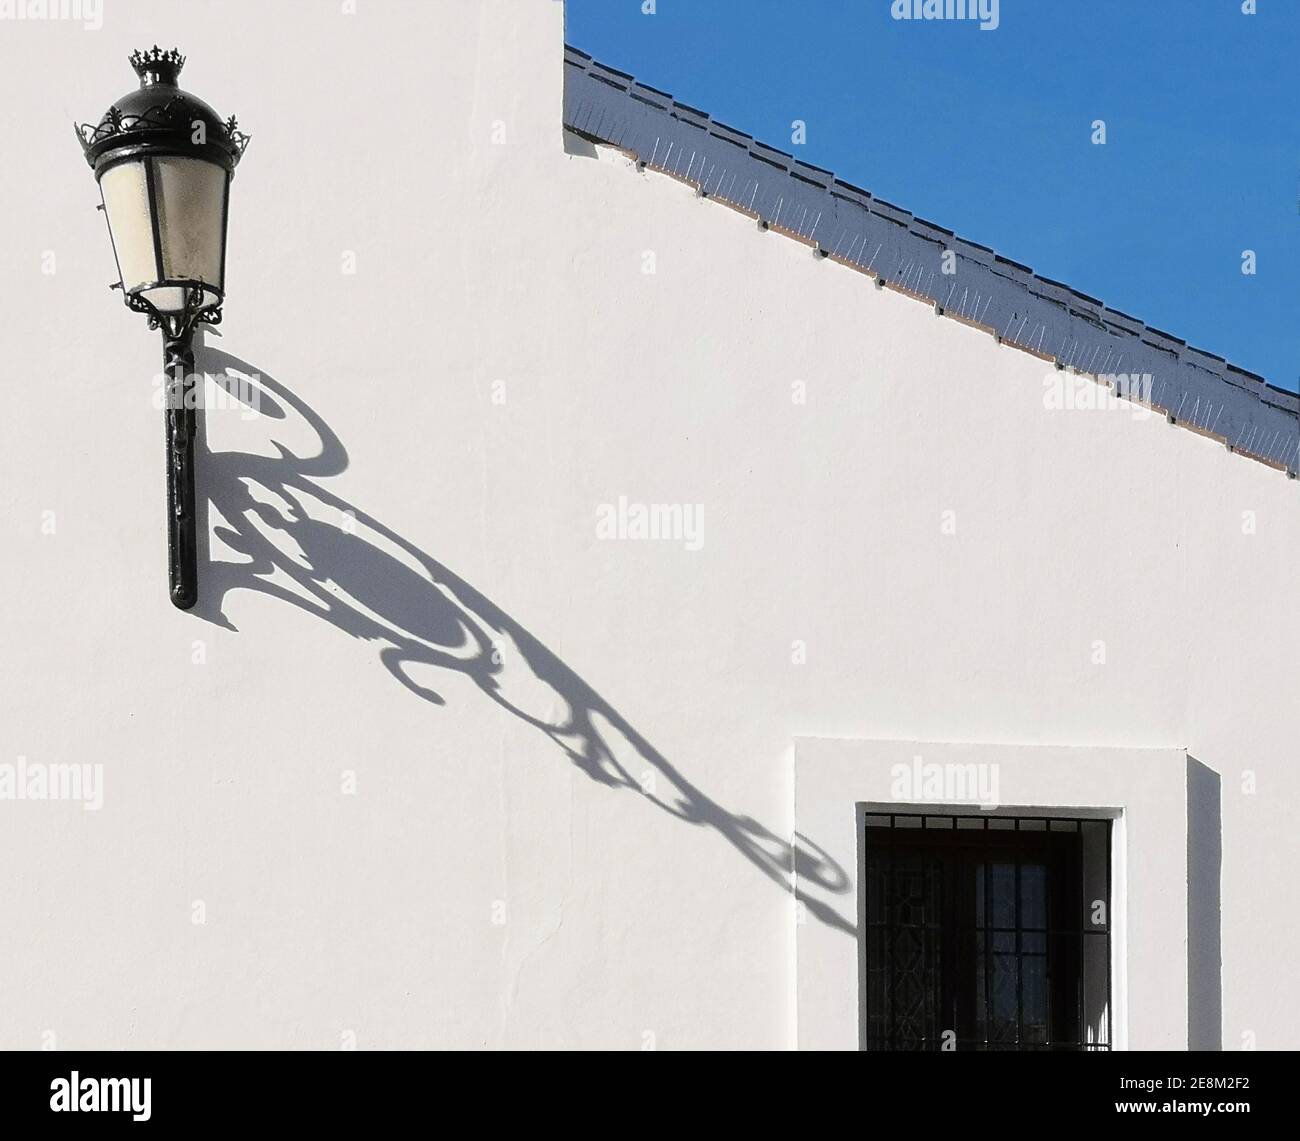 Street lamp and shadows in Nerja, Costa del Sol, Malaga Province, Andalucia, Spain Stock Photo